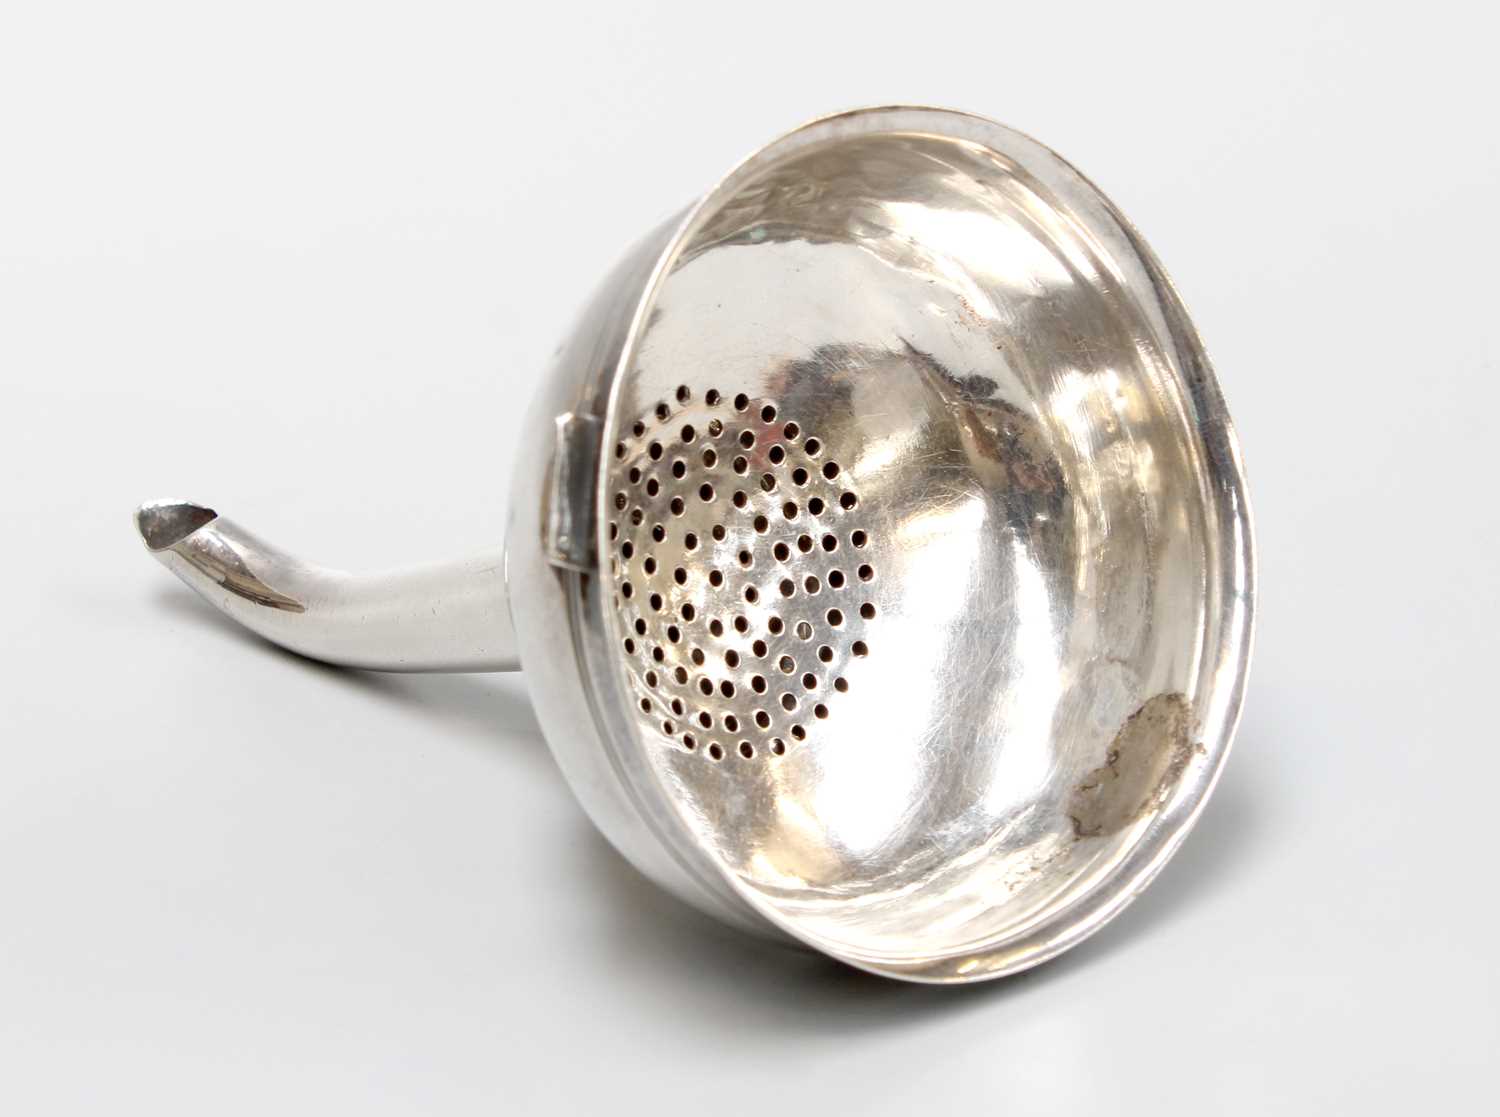 A George III Silver Wine-Funnel, Maker's Mark Perhaps CB, London, 1774, of typical form, with